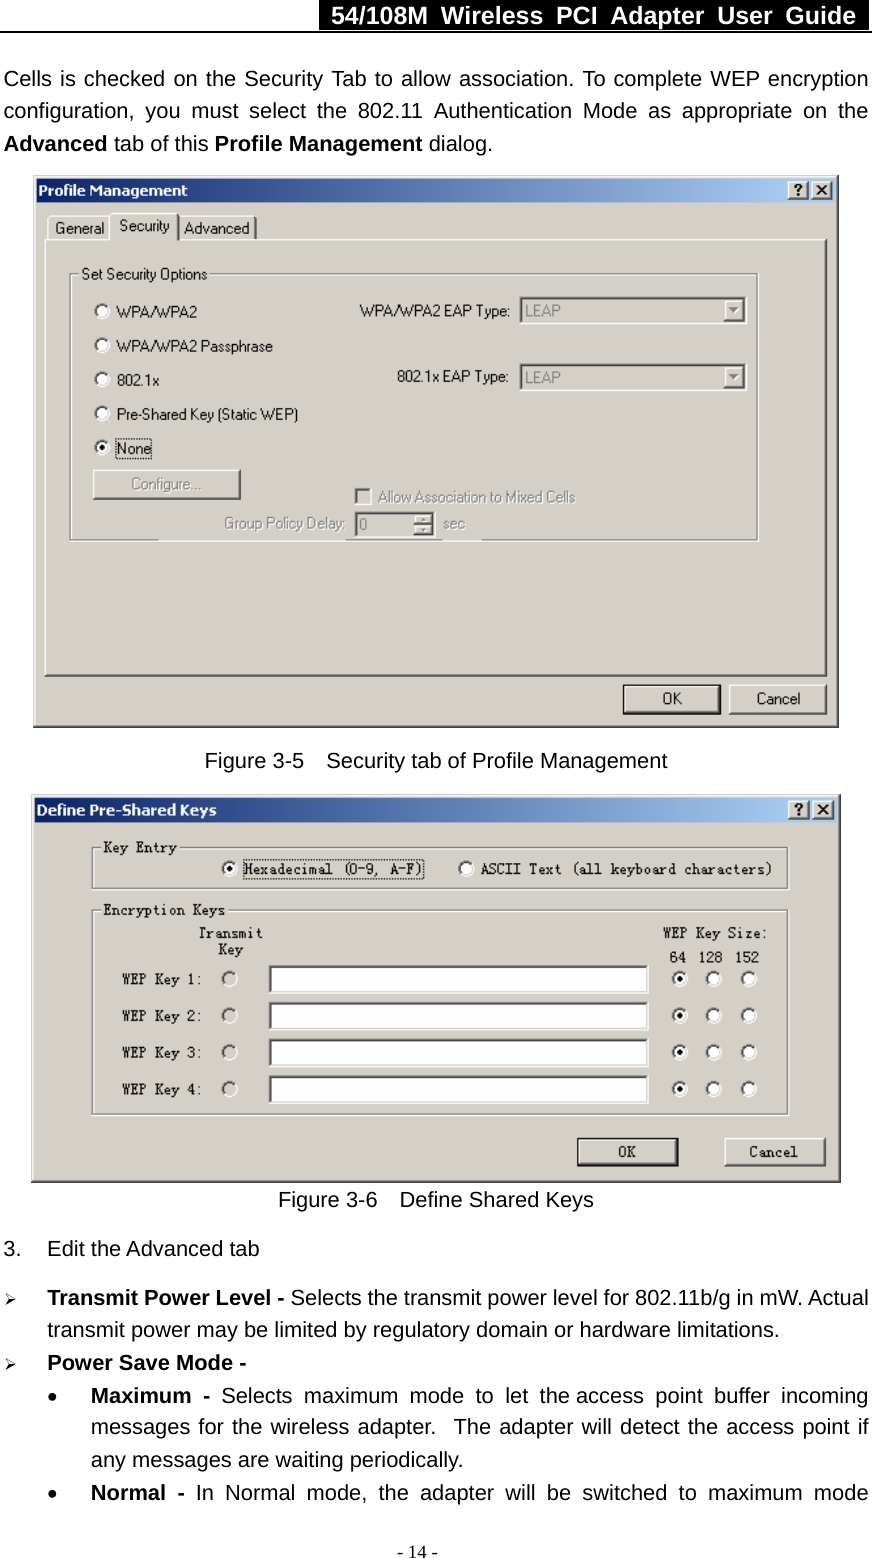   54/108M Wireless PCI Adapter User Guide  - 14 - Cells is checked on the Security Tab to allow association. To complete WEP encryption configuration, you must select the 802.11 Authentication Mode as appropriate on the Advanced tab of this Profile Management dialog.  Figure 3-5    Security tab of Profile Management  Figure 3-6    Define Shared Keys 3.  Edit the Advanced tab ¾ Transmit Power Level - Selects the transmit power level for 802.11b/g in mW. Actual transmit power may be limited by regulatory domain or hardware limitations. ¾ Power Save Mode - • Maximum - Selects maximum mode to let the access point buffer incoming messages for the wireless adapter.  The adapter will detect the access point if any messages are waiting periodically. • Normal - In Normal mode, the adapter will be switched to maximum mode 